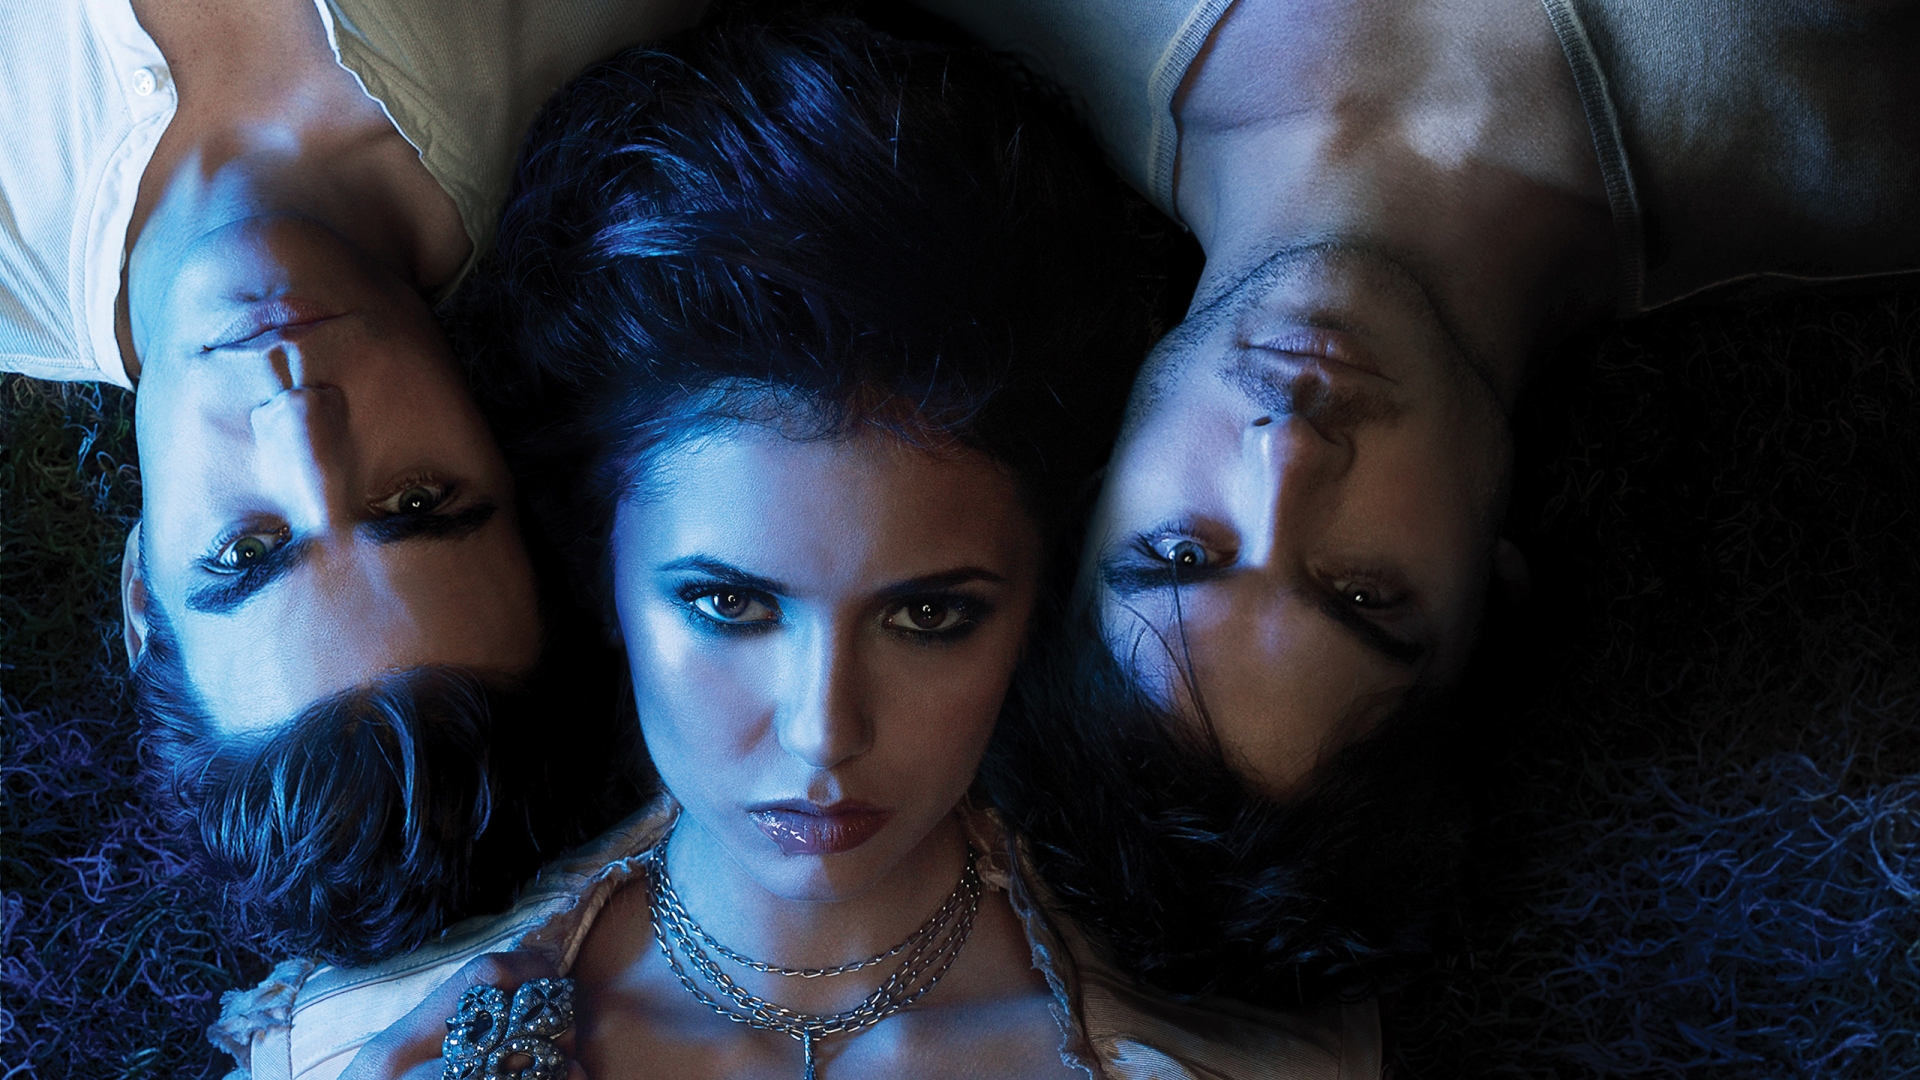 The Beautiful Vampires for 1920 x 1080 HDTV 1080p resolution